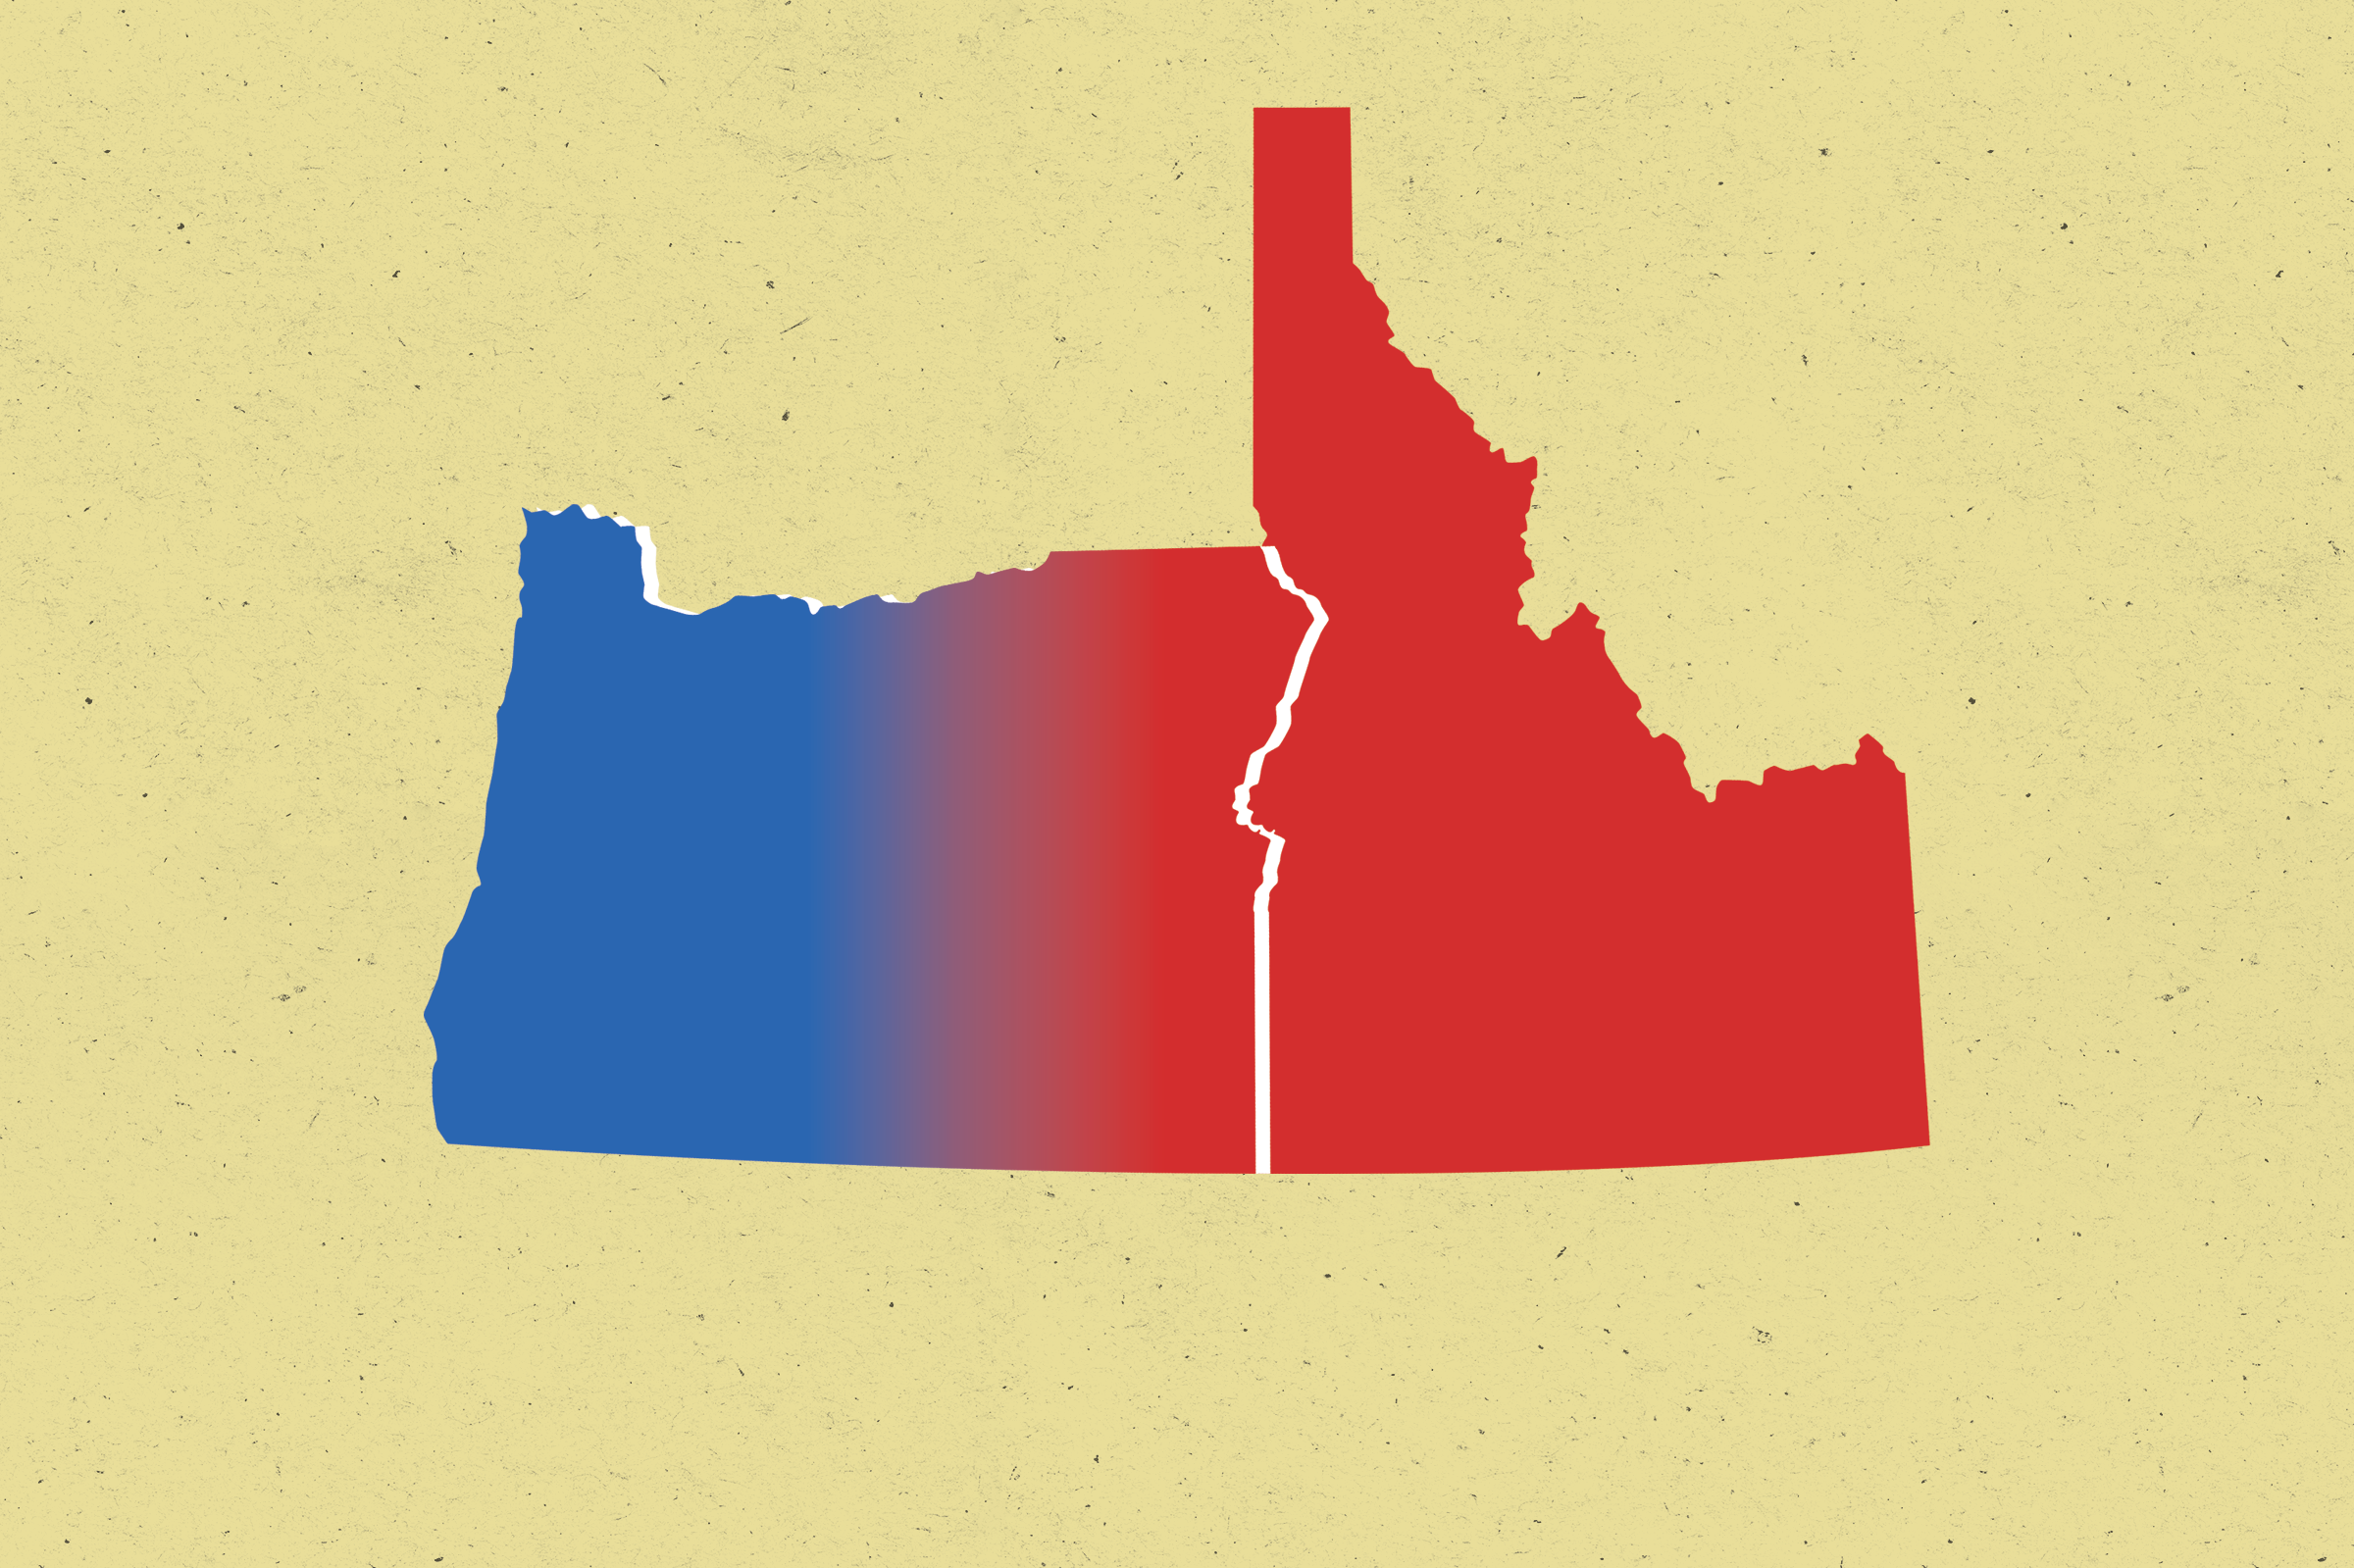 A photo illustration showing Oregon and Idaho, with Oregon colored half blue, half red, and Idaho colored red.